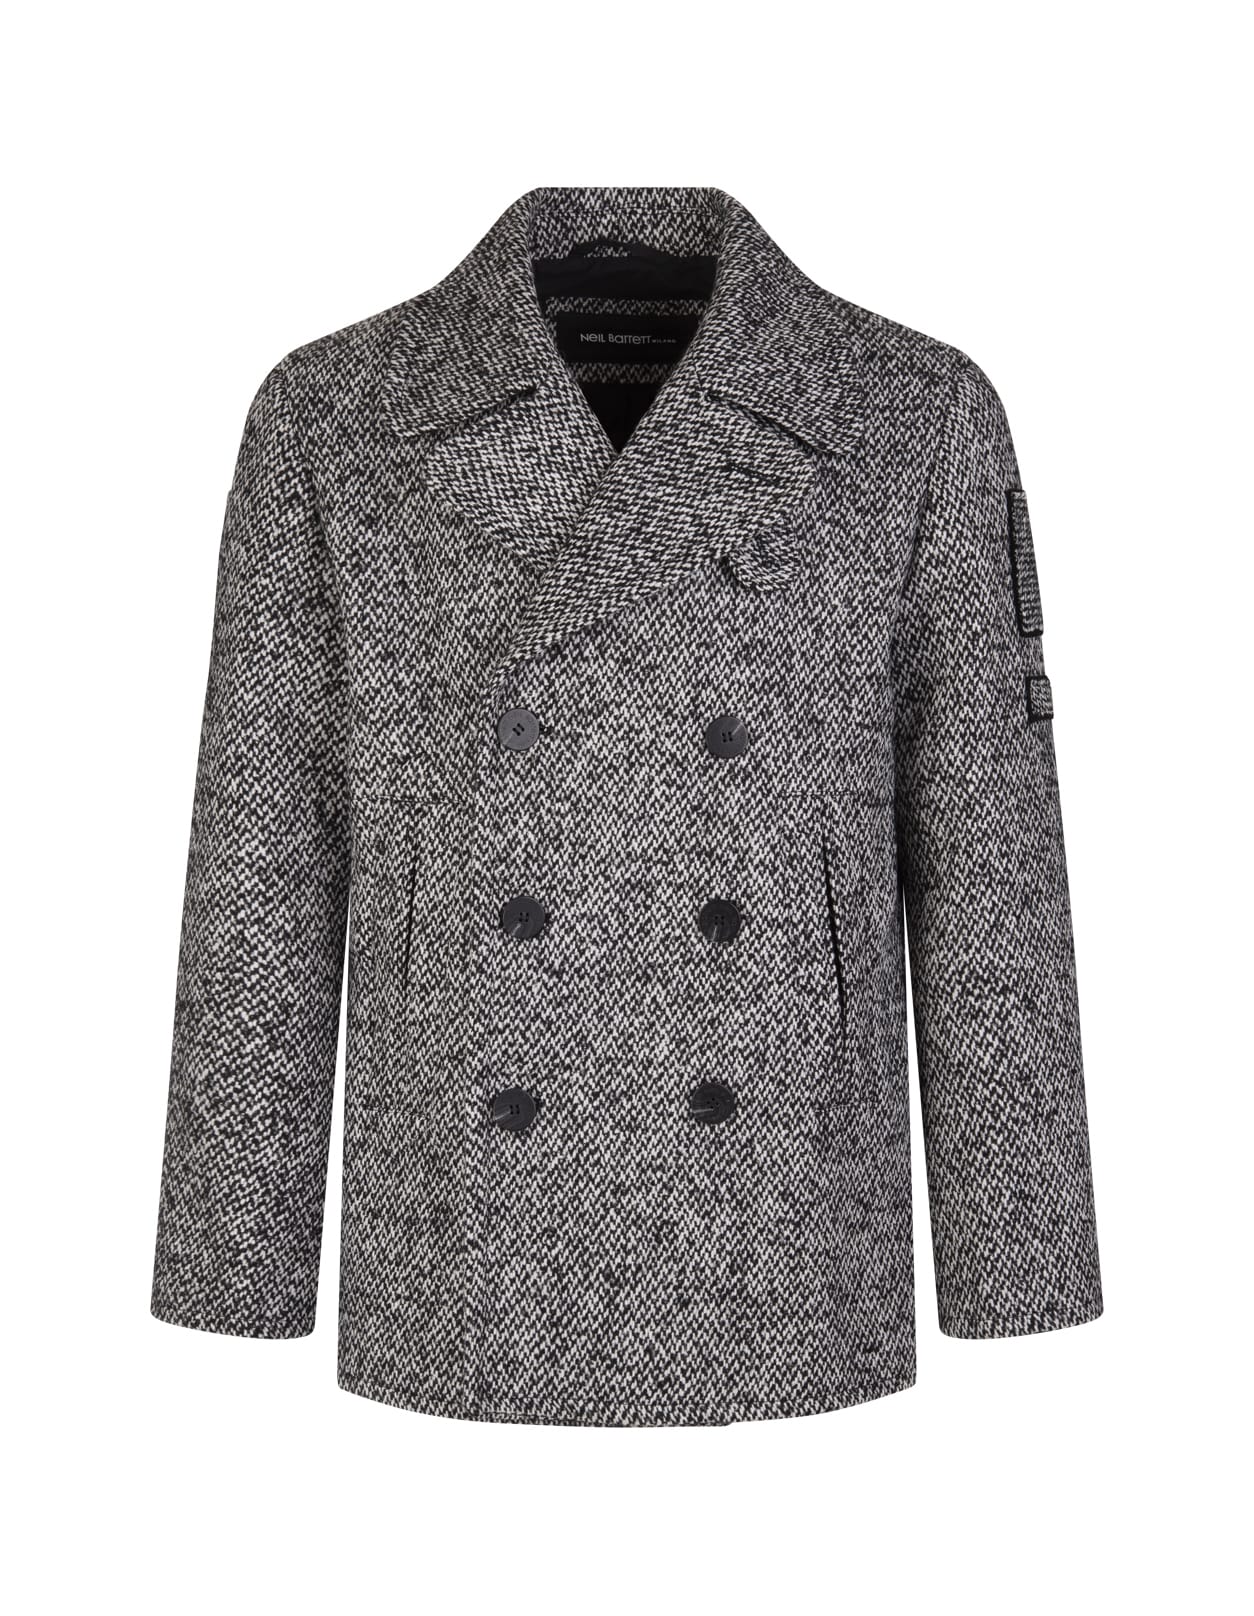 Neil Barrett Black And White Tweed Double-breasted Coat In Black/offwhite